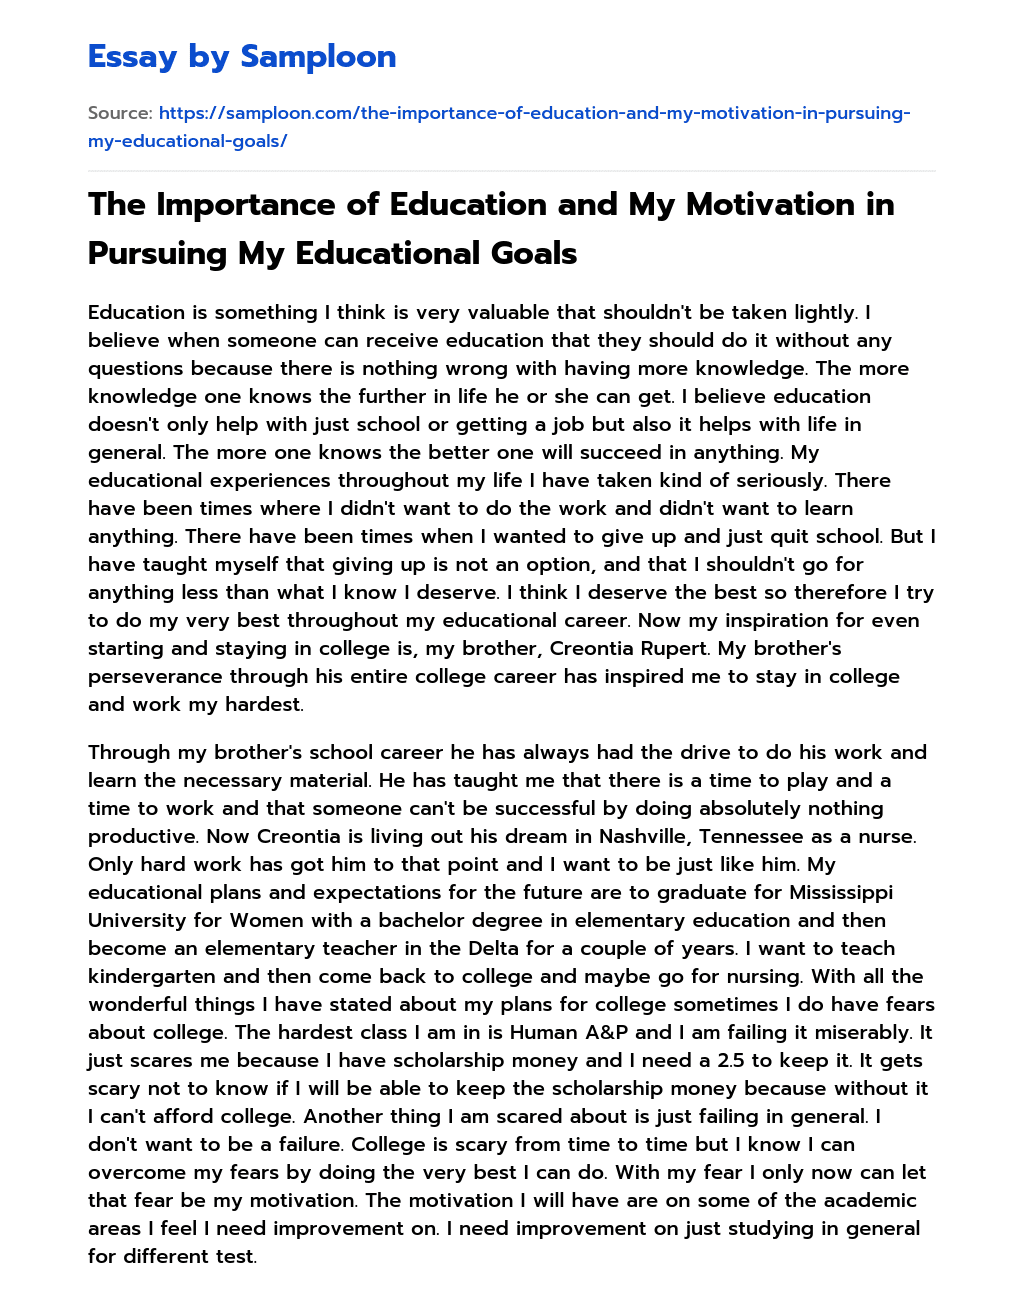 The Importance of Education and My Motivation in Pursuing My Educational Goals essay